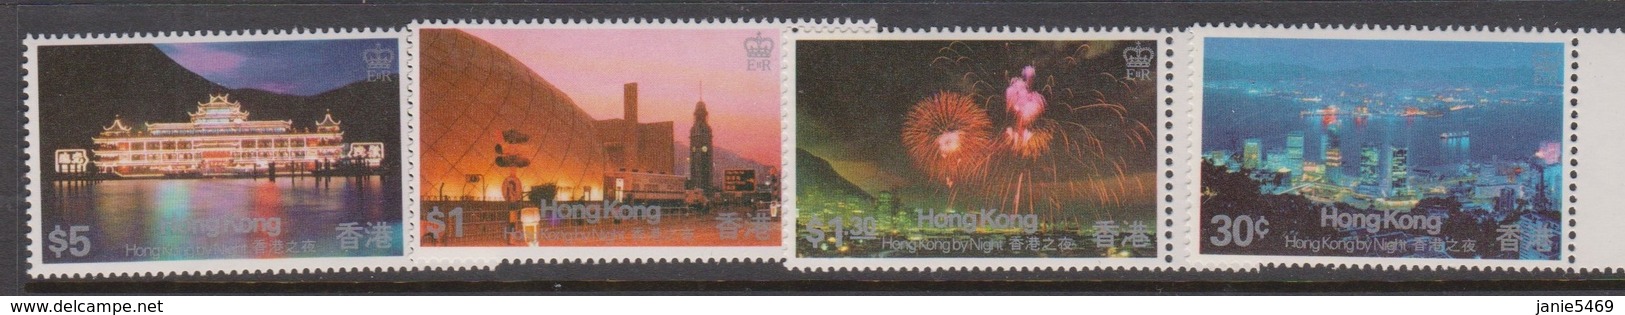 Hong Kong Scott 415-418 1983 Views By Night, Mint Never Hinged - Unused Stamps